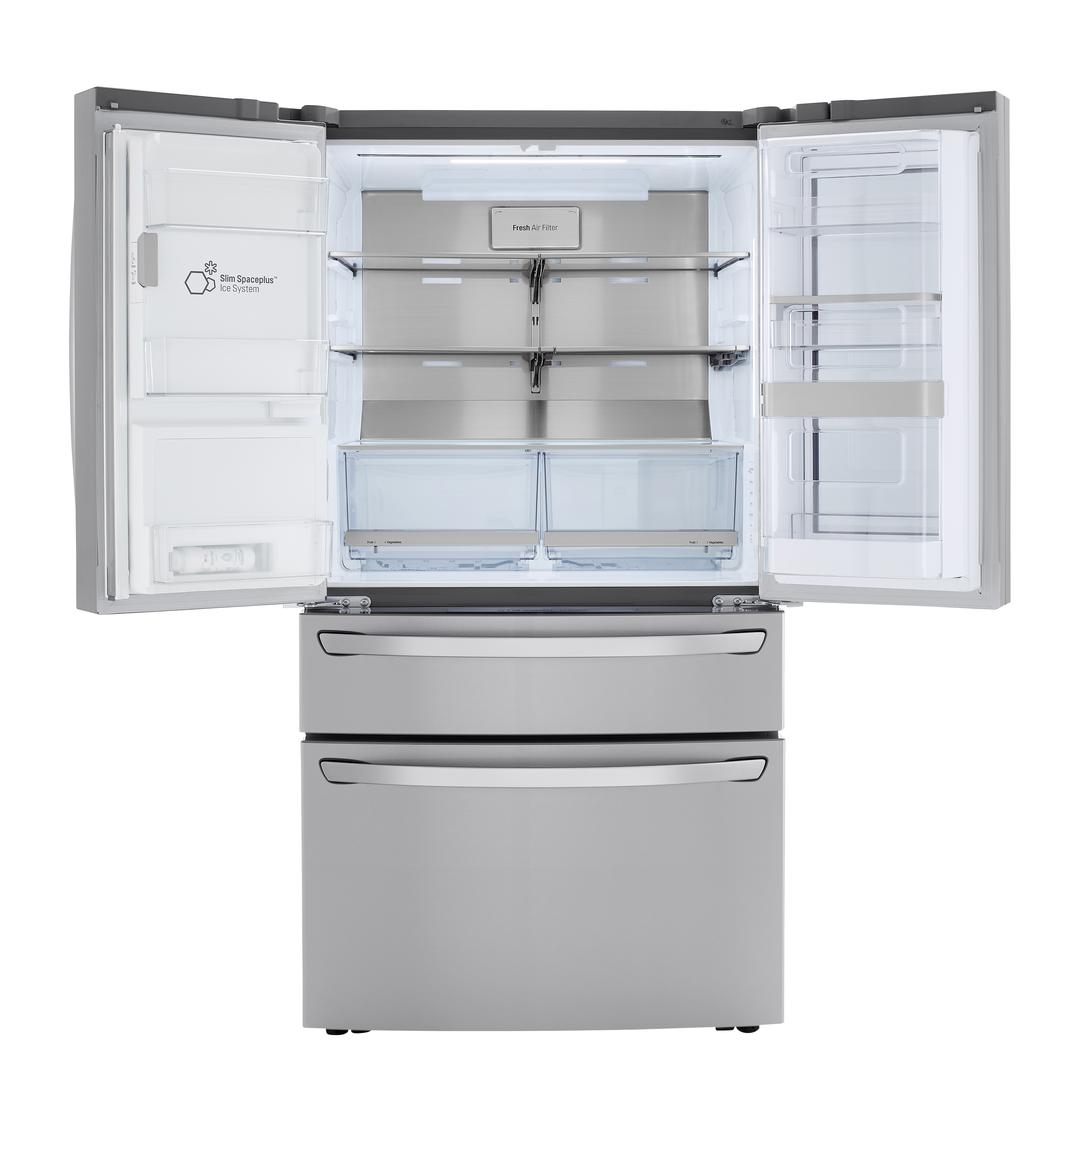 LG - 35.8 Inch 22.5 cu. ft French Door Refrigerator in Stainless - LRMVC2306S